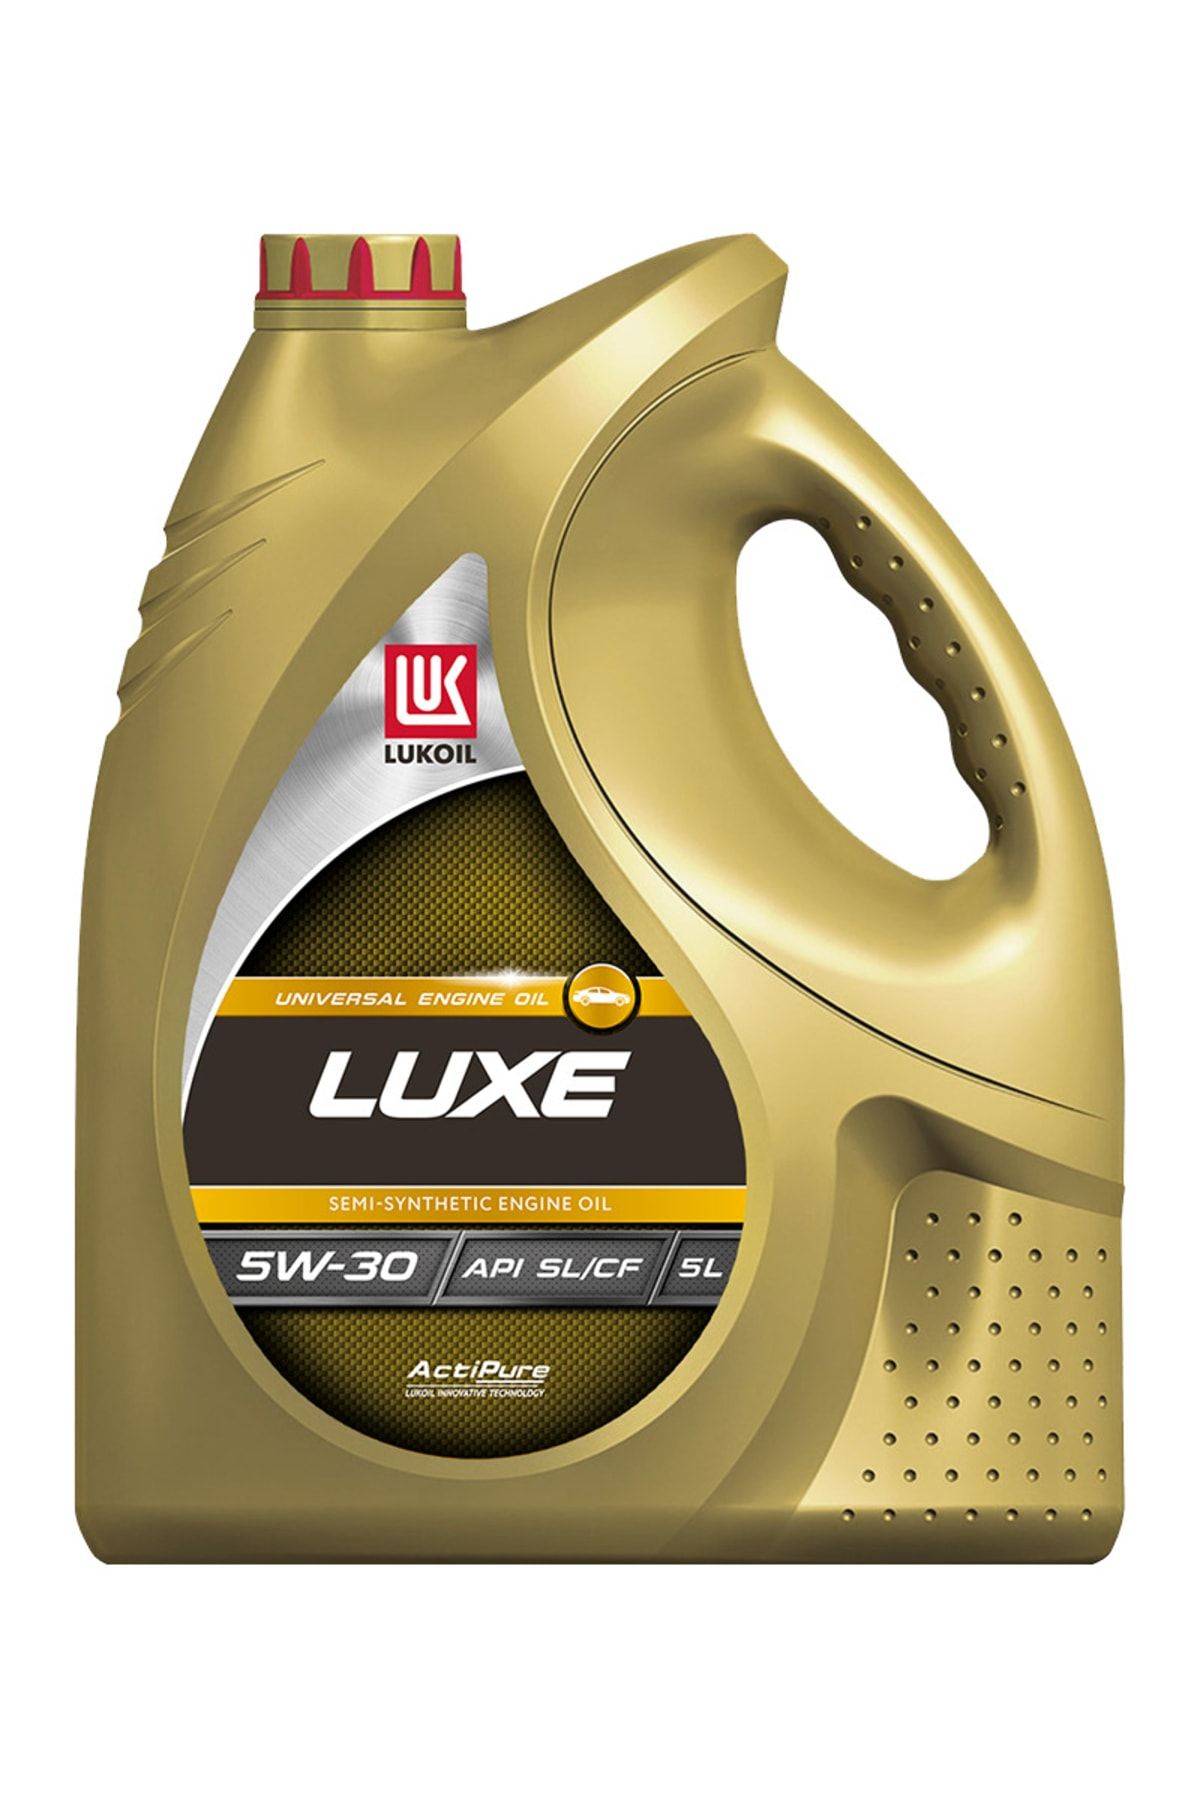 Моторные масла лукойл api sl. Lukoil Luxe 10w-40. Масло Лукойл 10w 40 полусинтетика. Лукойл Люкс SAE 10w-40, API SL/CF 5 Л. Лукойл Luxe 10w 40 полусинтетика.